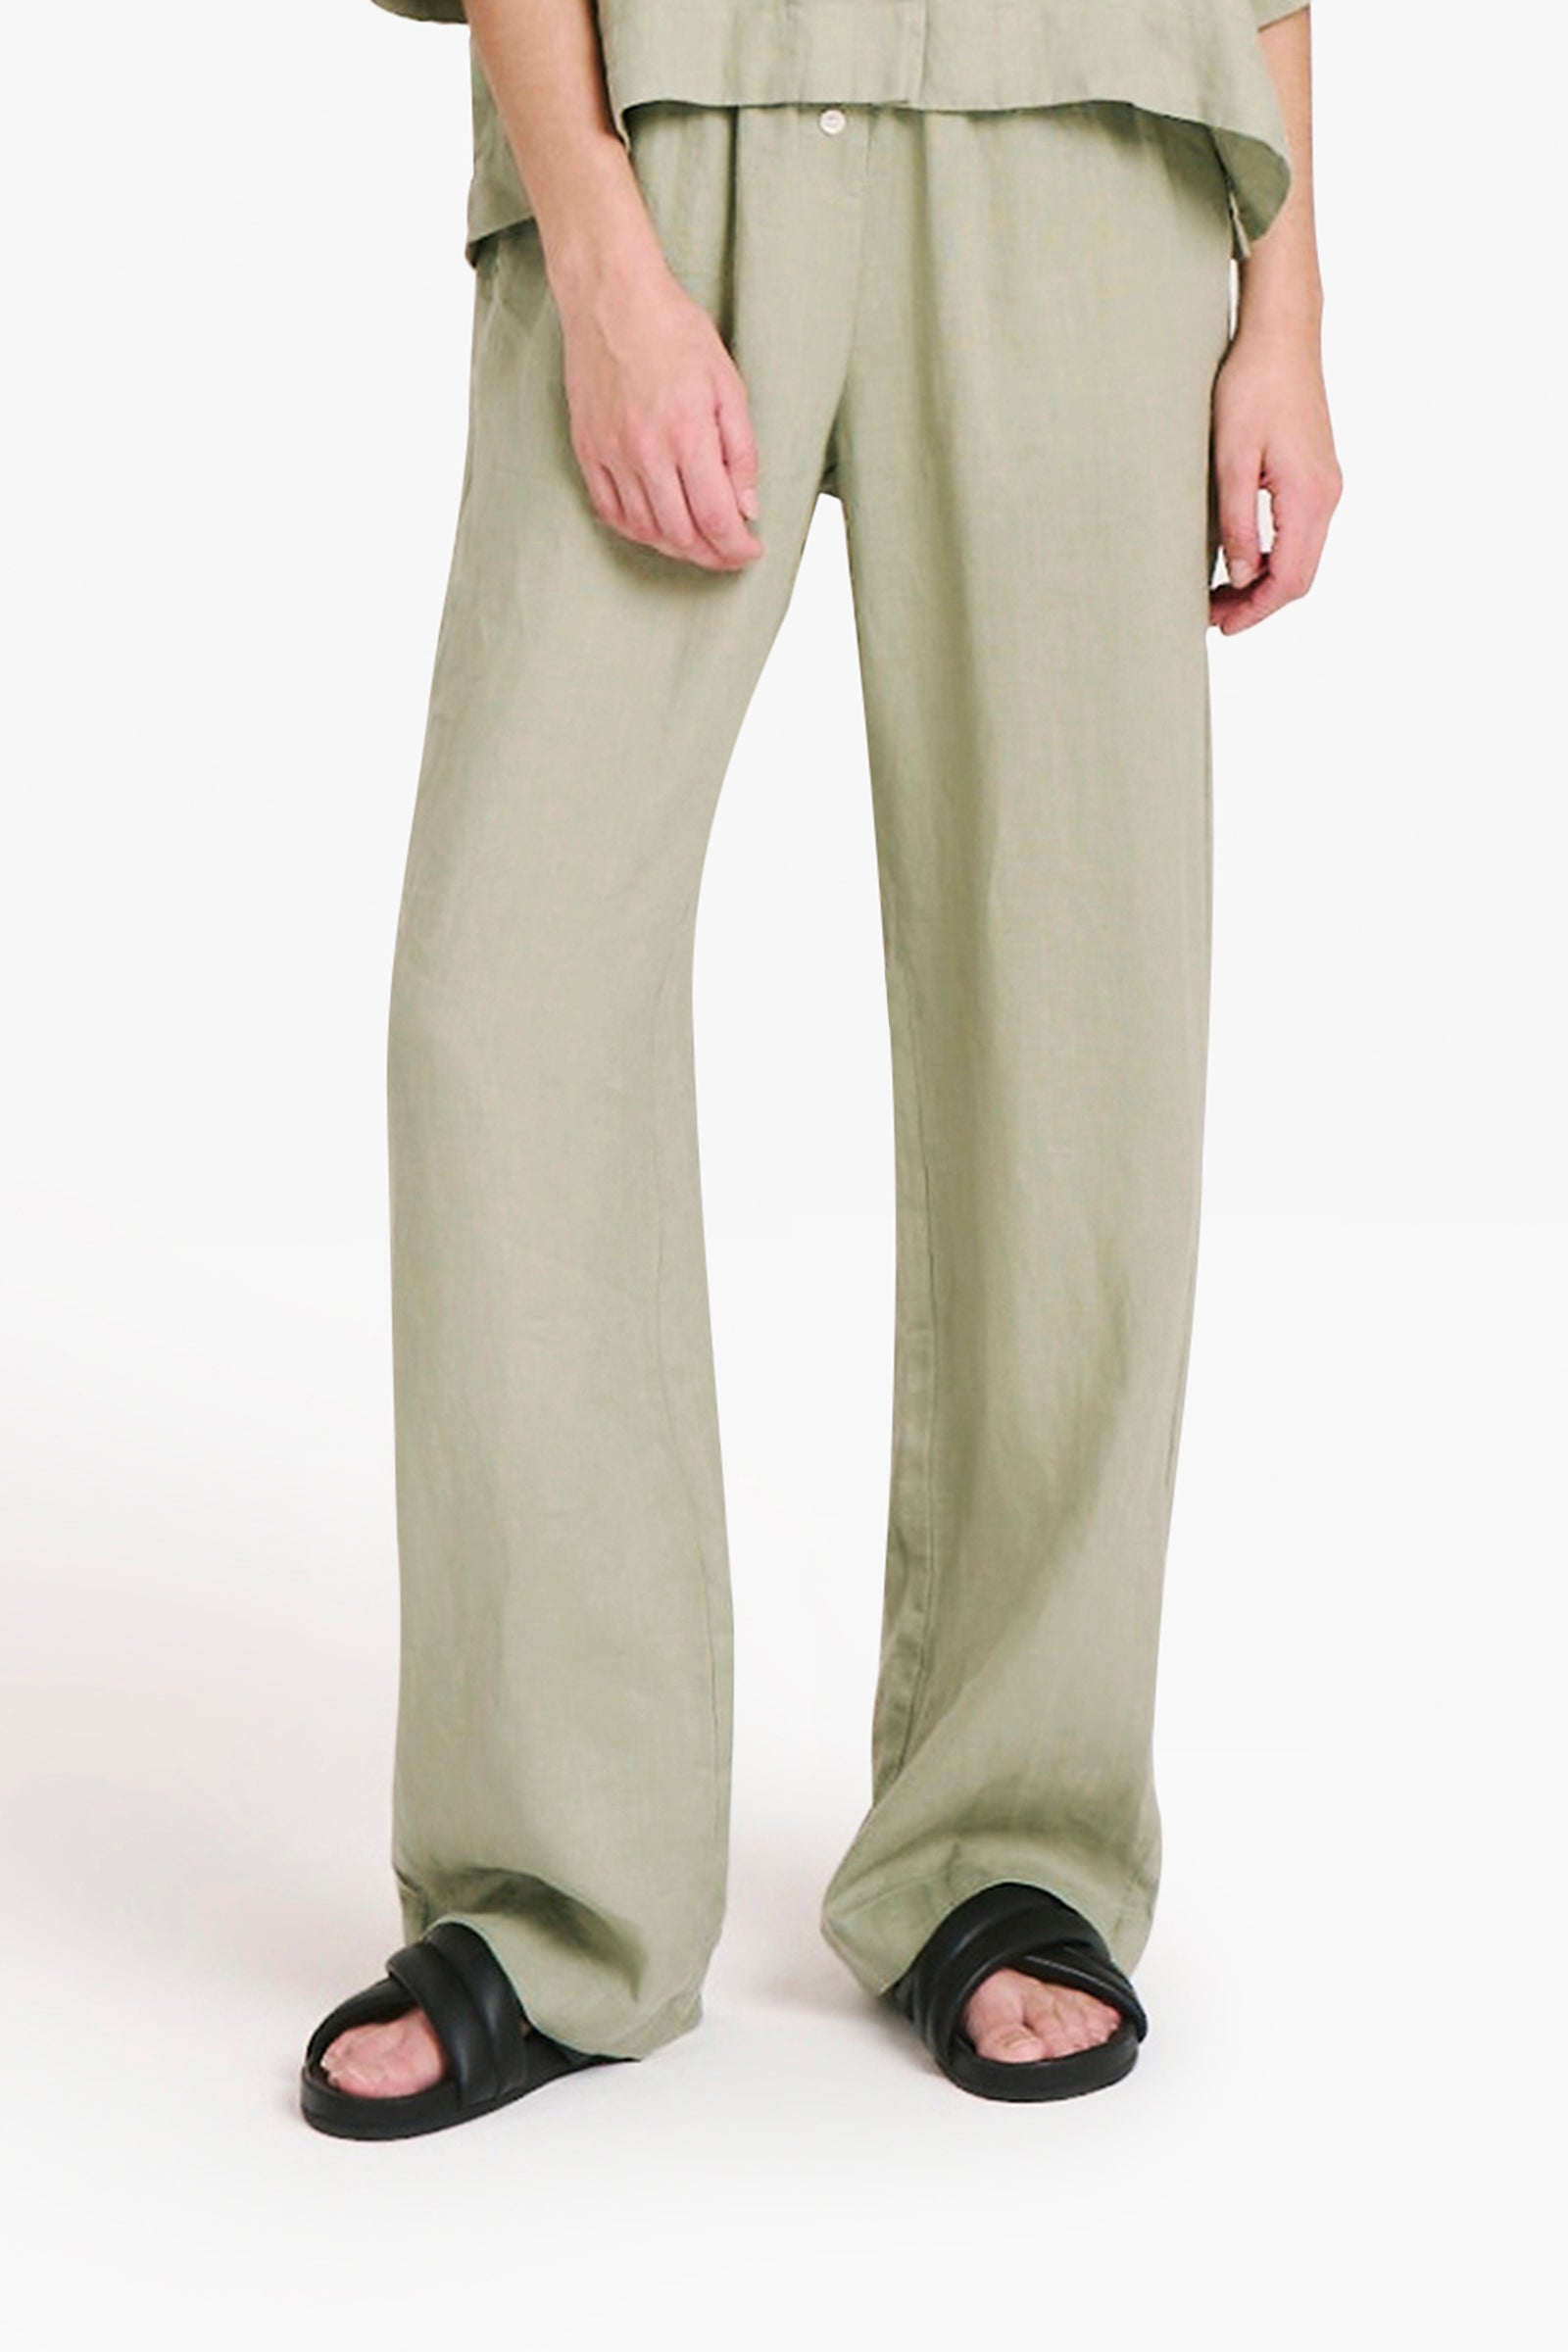 Nude Lucy Lounge Linen Shirt Pant Set in Olive